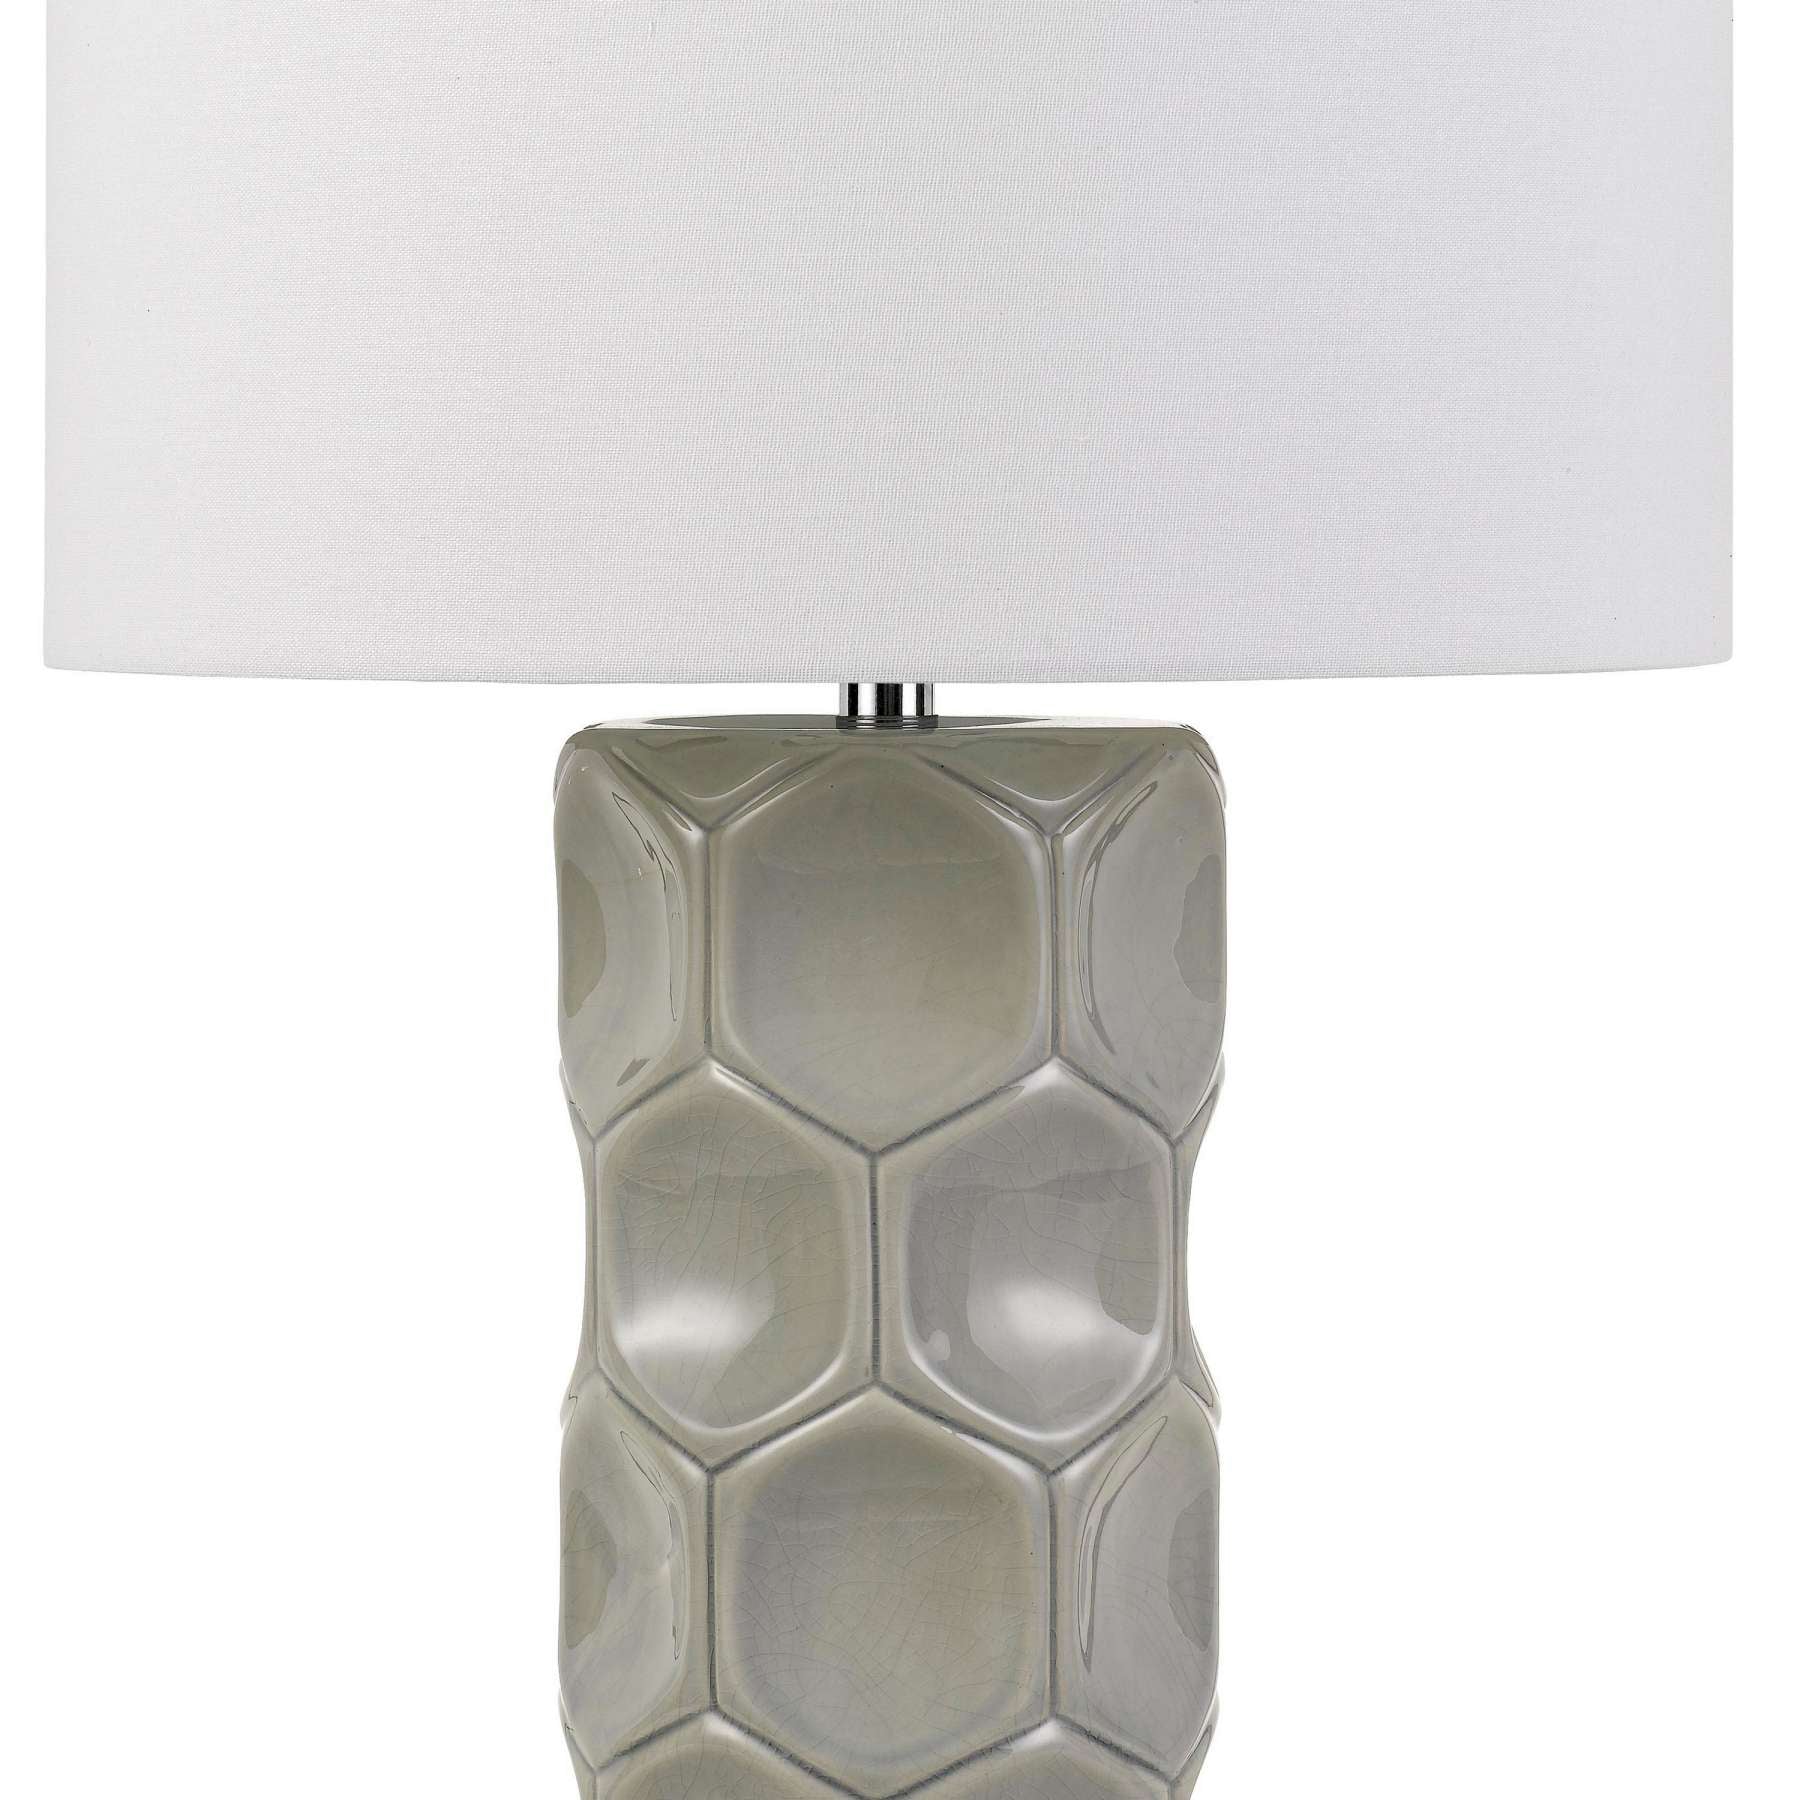 150 Watt Textured Ceramic Frame Table Lamp With Fabric Shade, White And Gray By Benzara